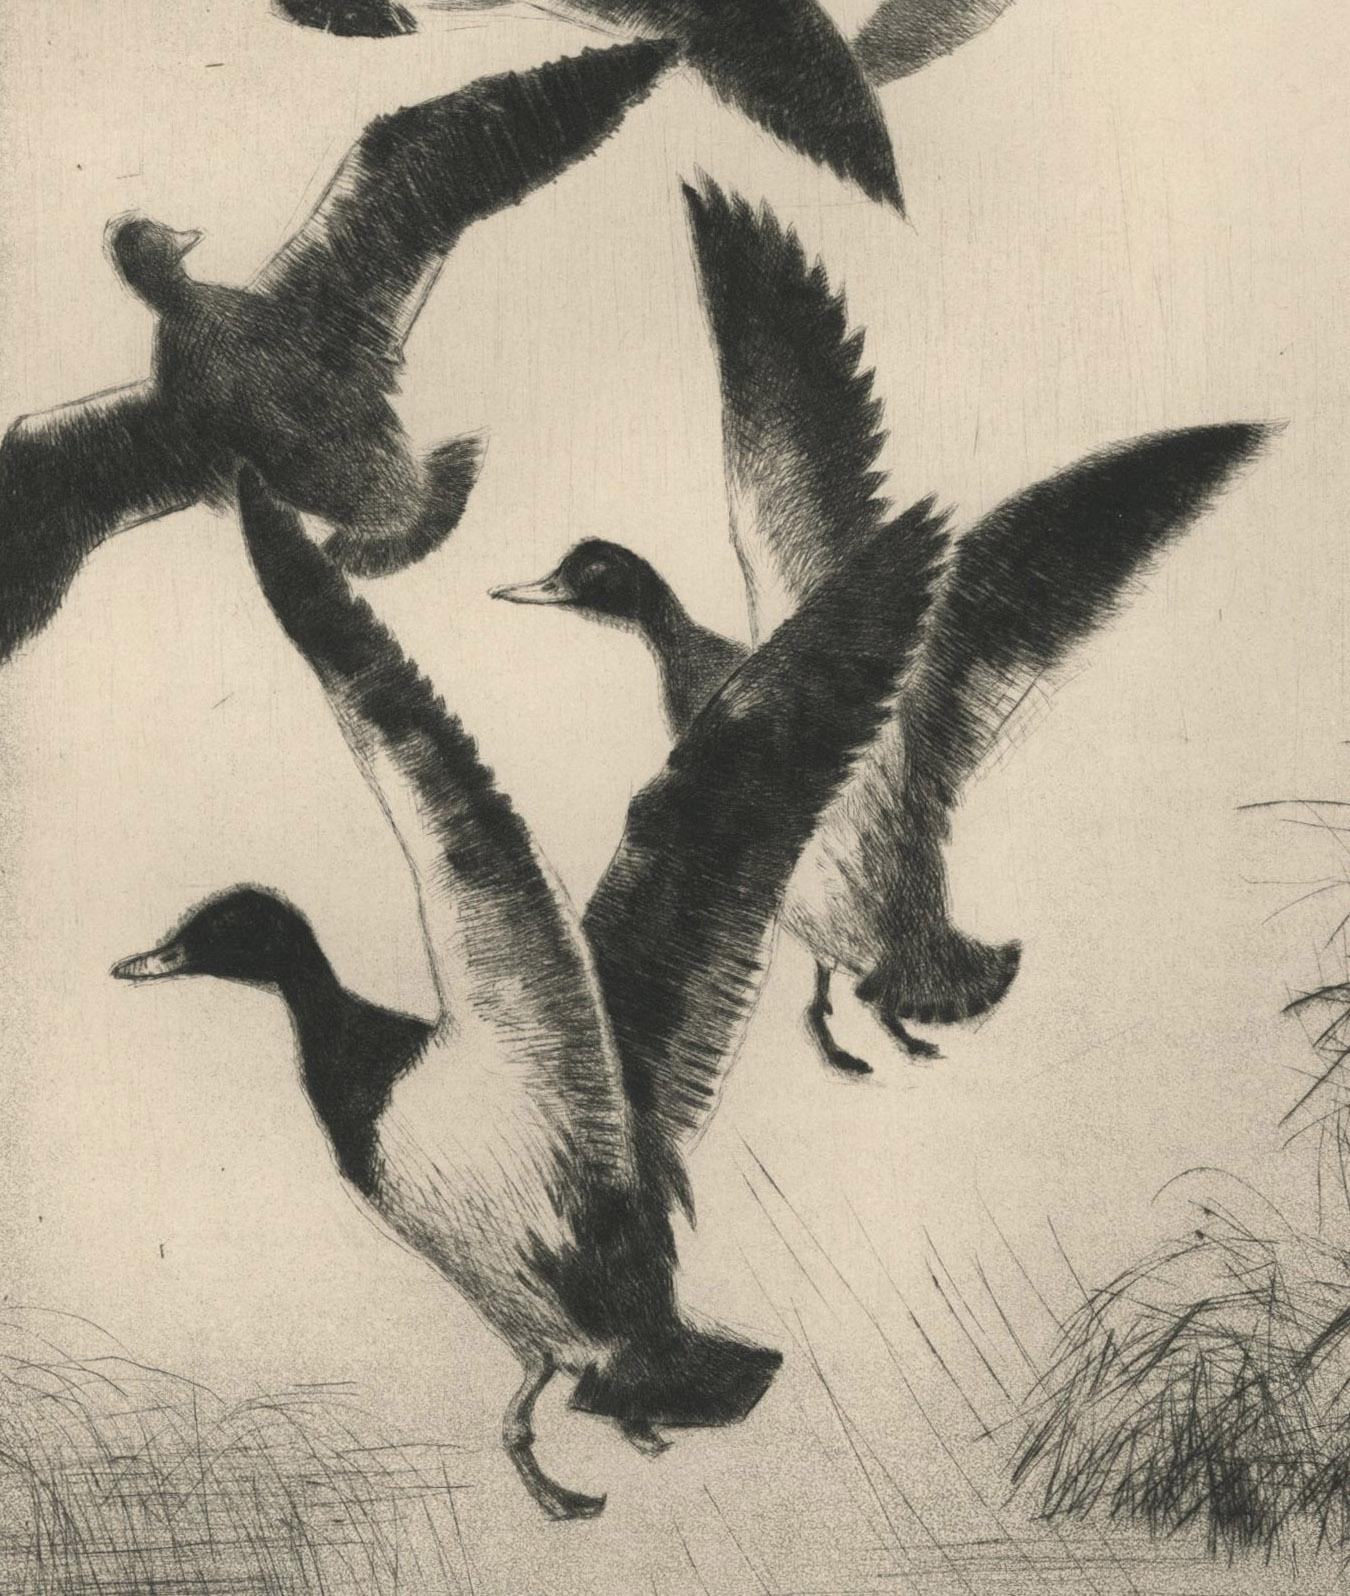 untitled (Duck taking to flight, flushed by a dog) - Beige Animal Print by Paul H. Winchell